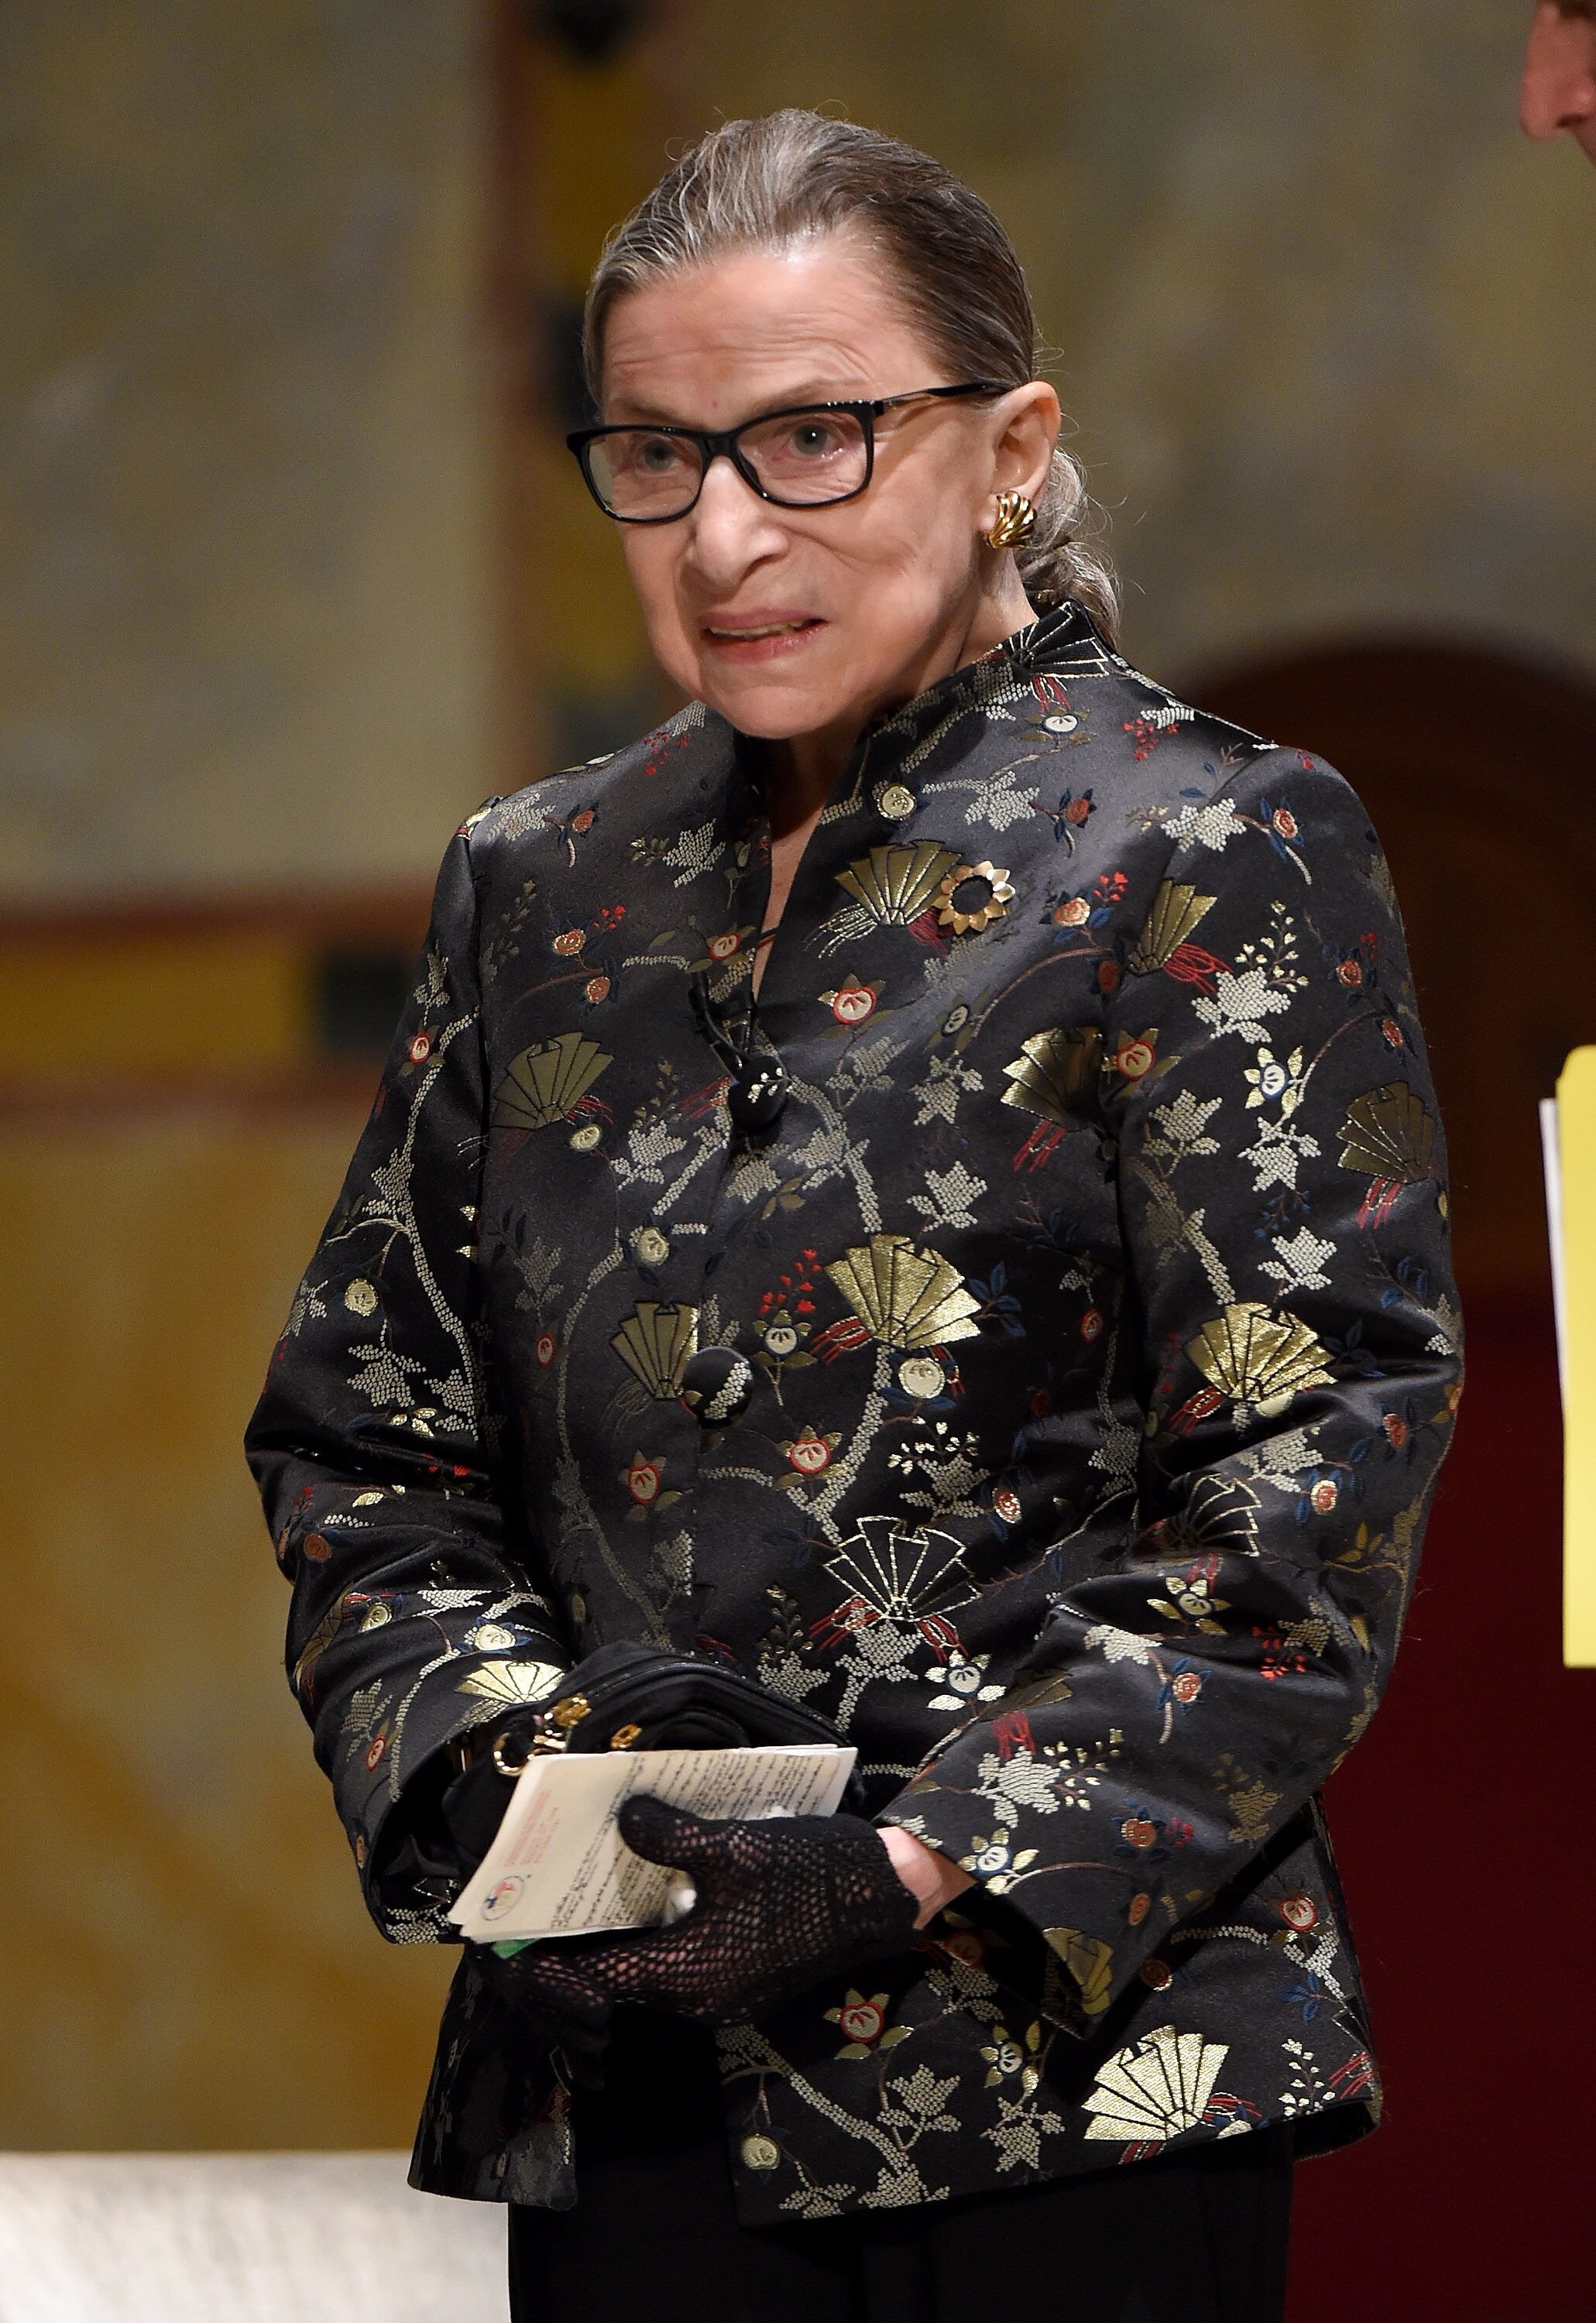 Supreme Court Justice Ruth Bader Ginsburg at An Historic Evening in her honor on September 21, 2016, in New York City | Photo: Michael Kovac/Getty Images